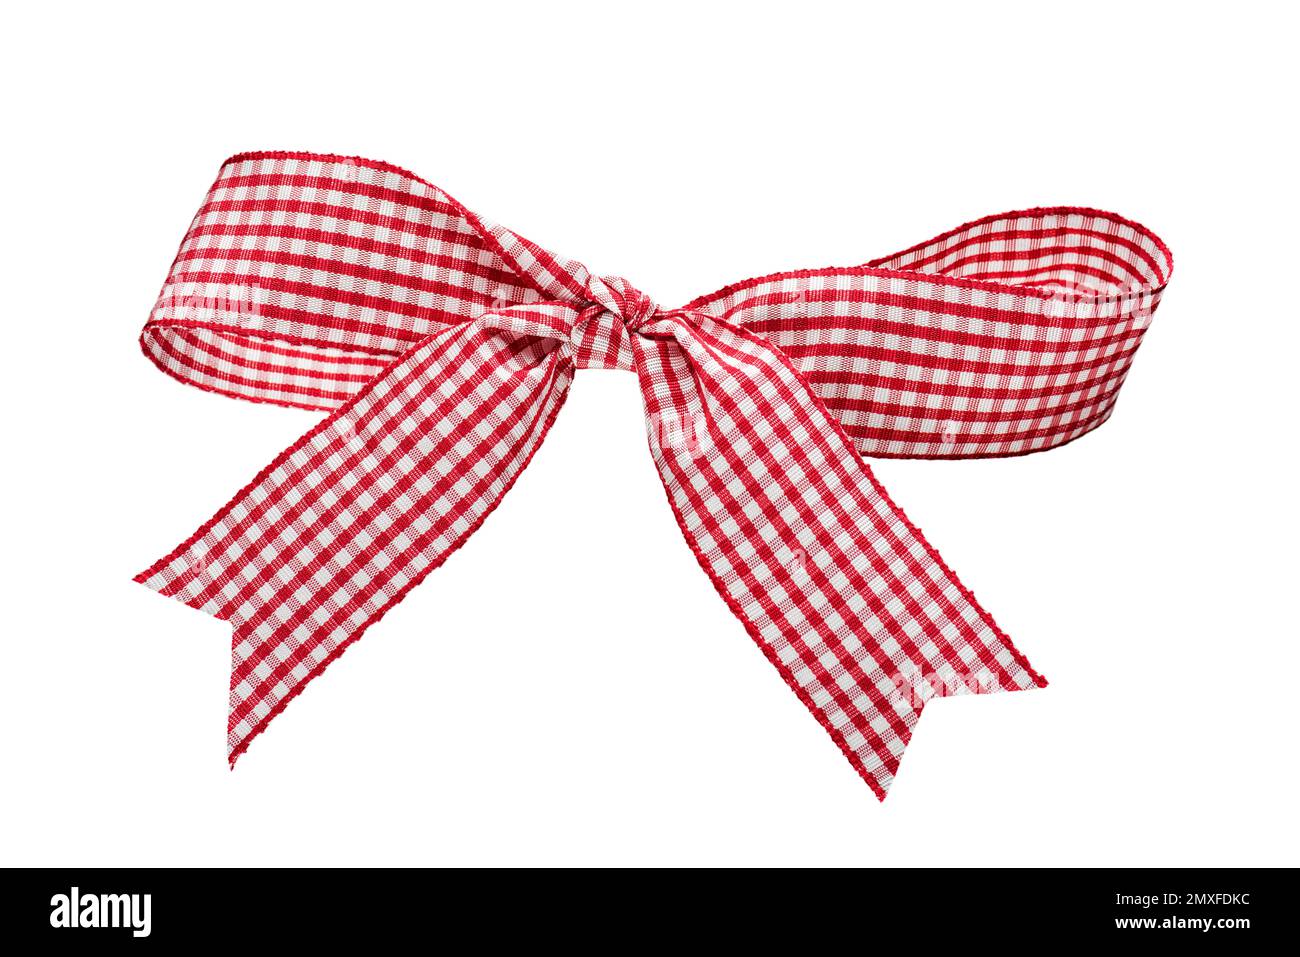 Plaid fabric ribbon with bow on transparent background, PNG image. Stock Photo